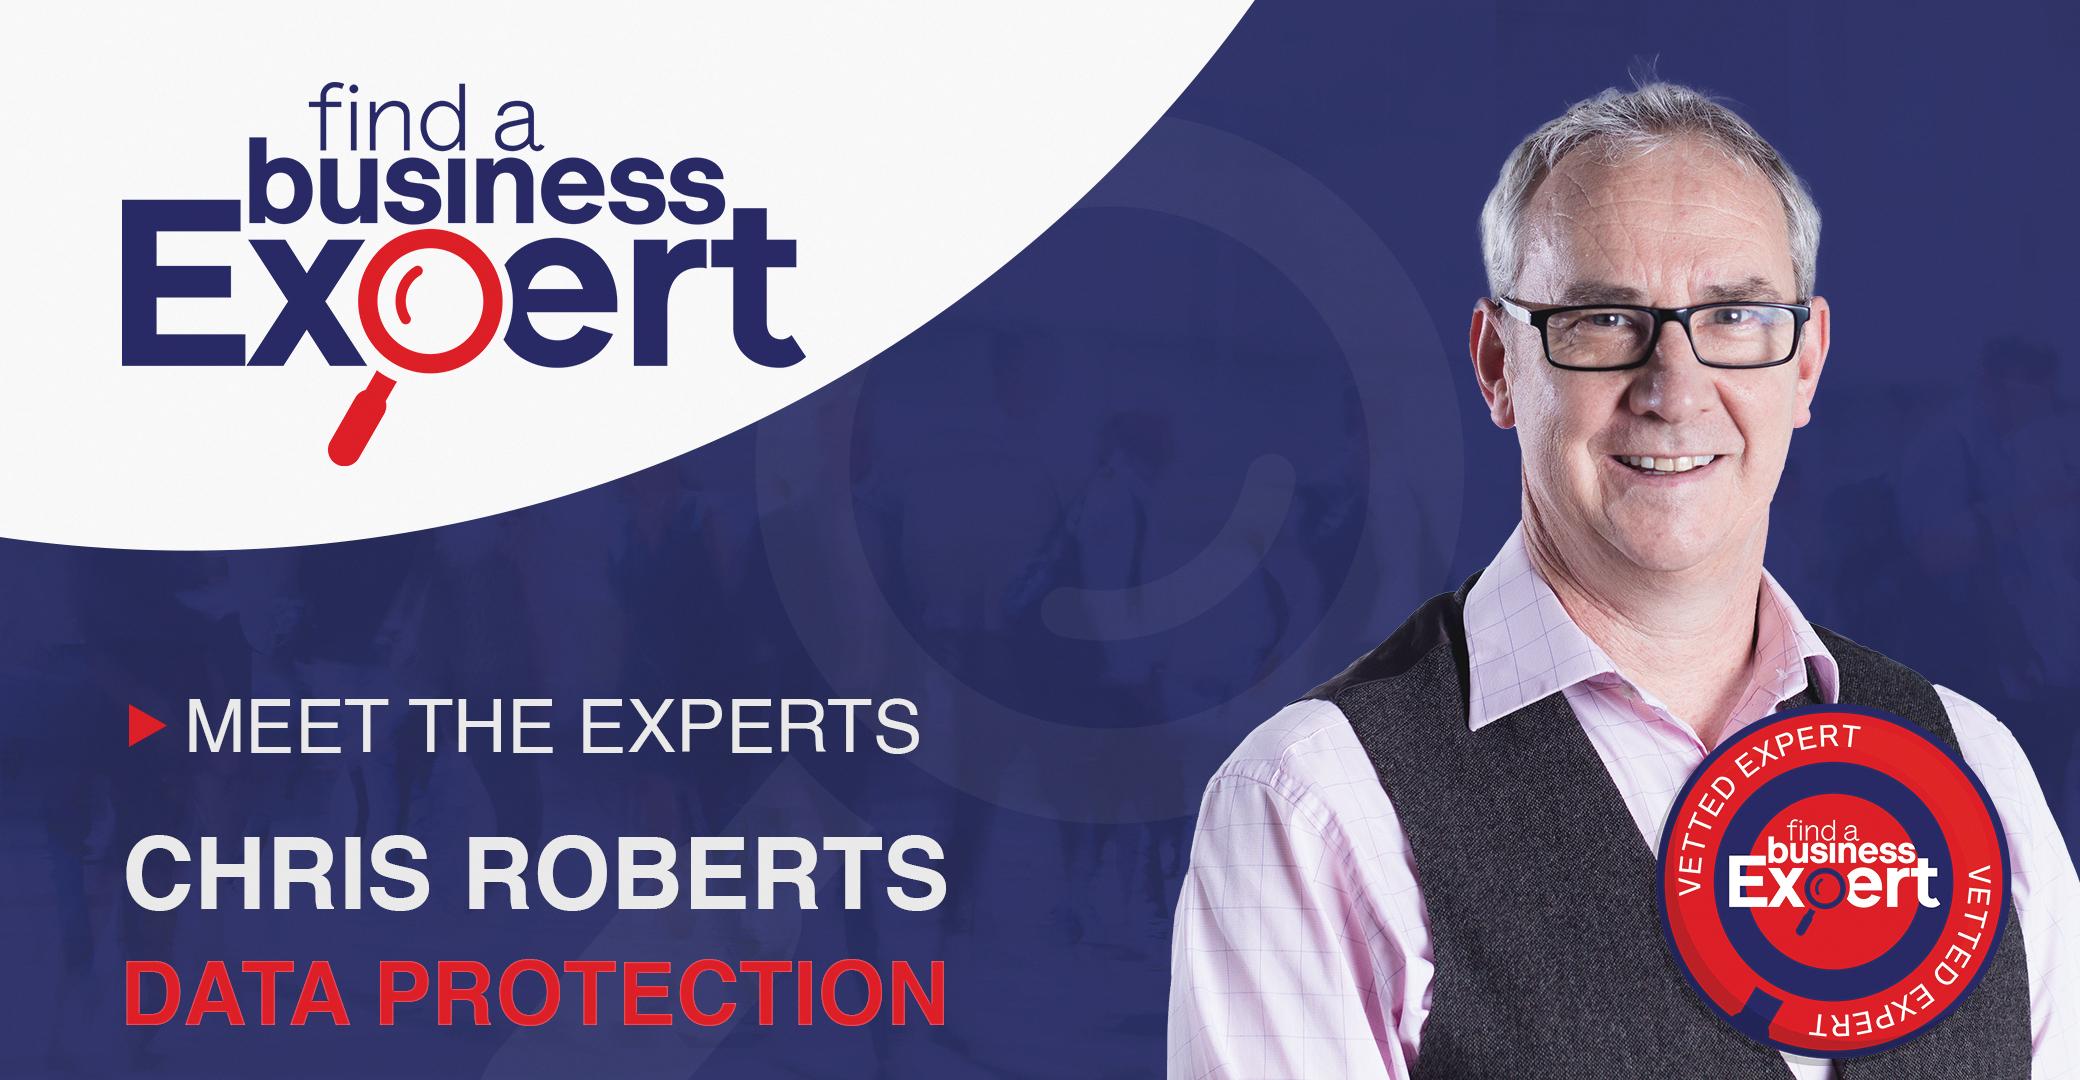 Chris Roberts - Data Protection & Cyber-Security